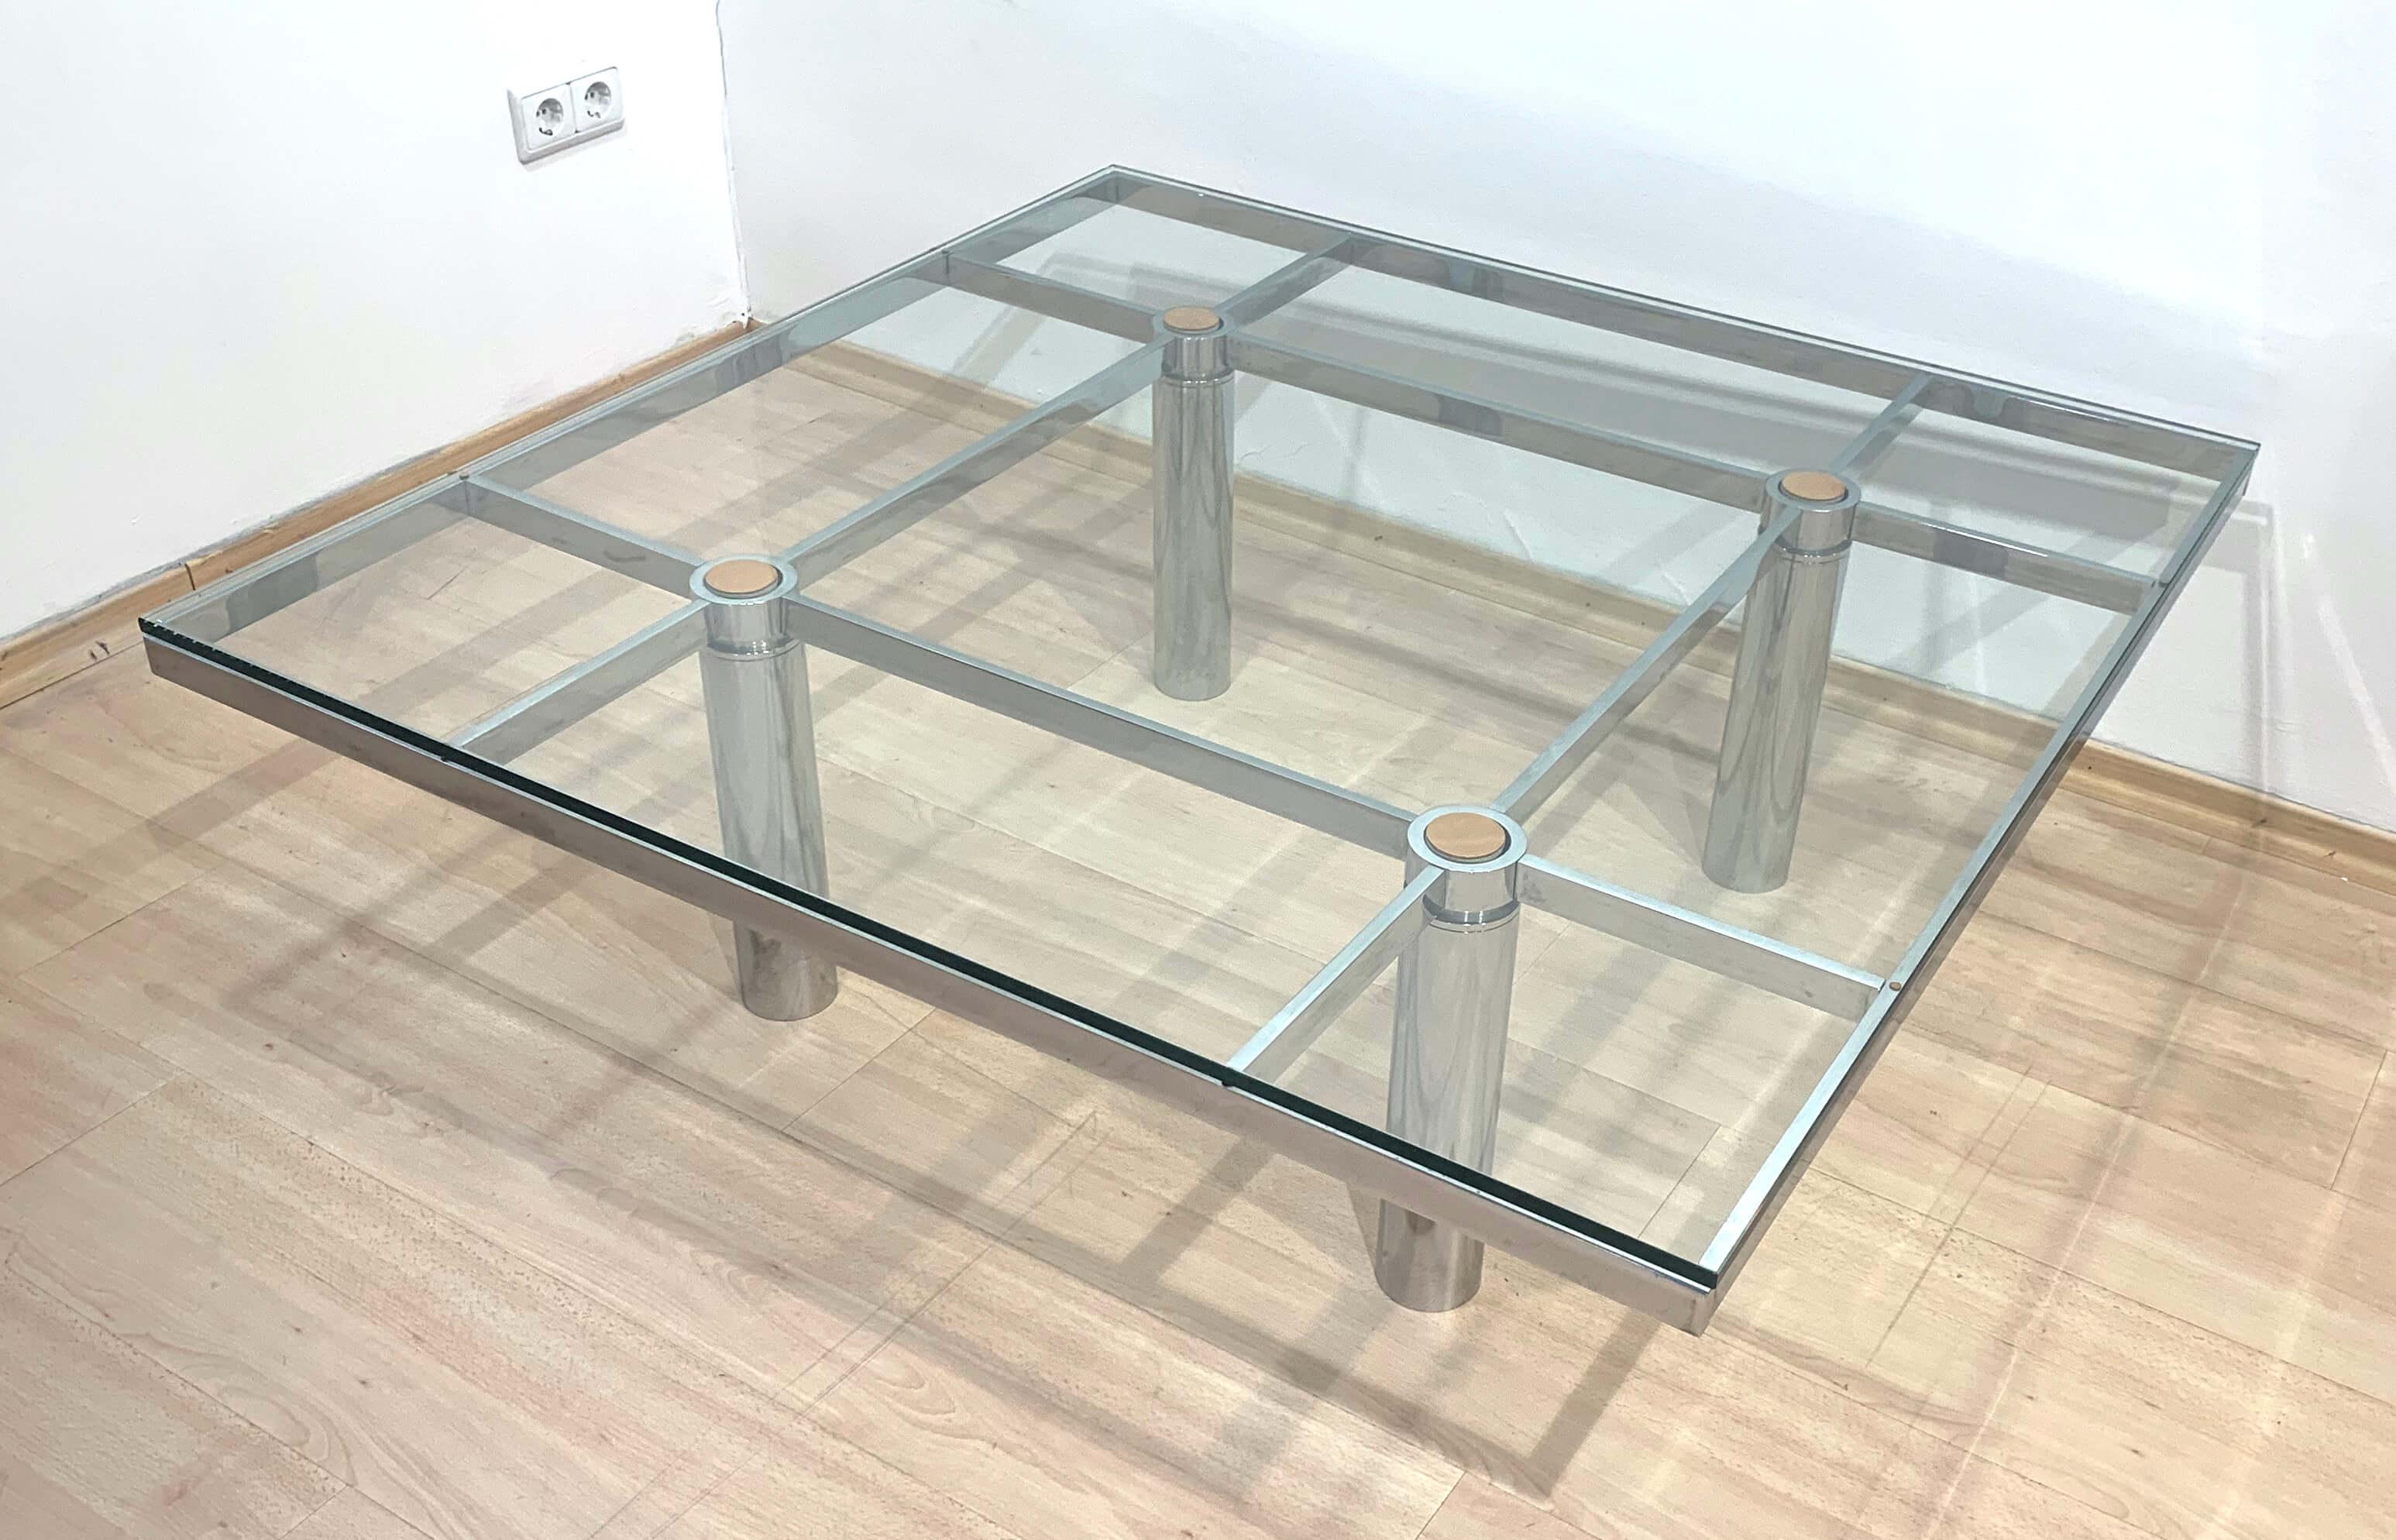 Mid-Century Modern Coffee Table 'Andre' by Afra & Tobia Scarpa, Chromed and Glass, Italy circa 1970